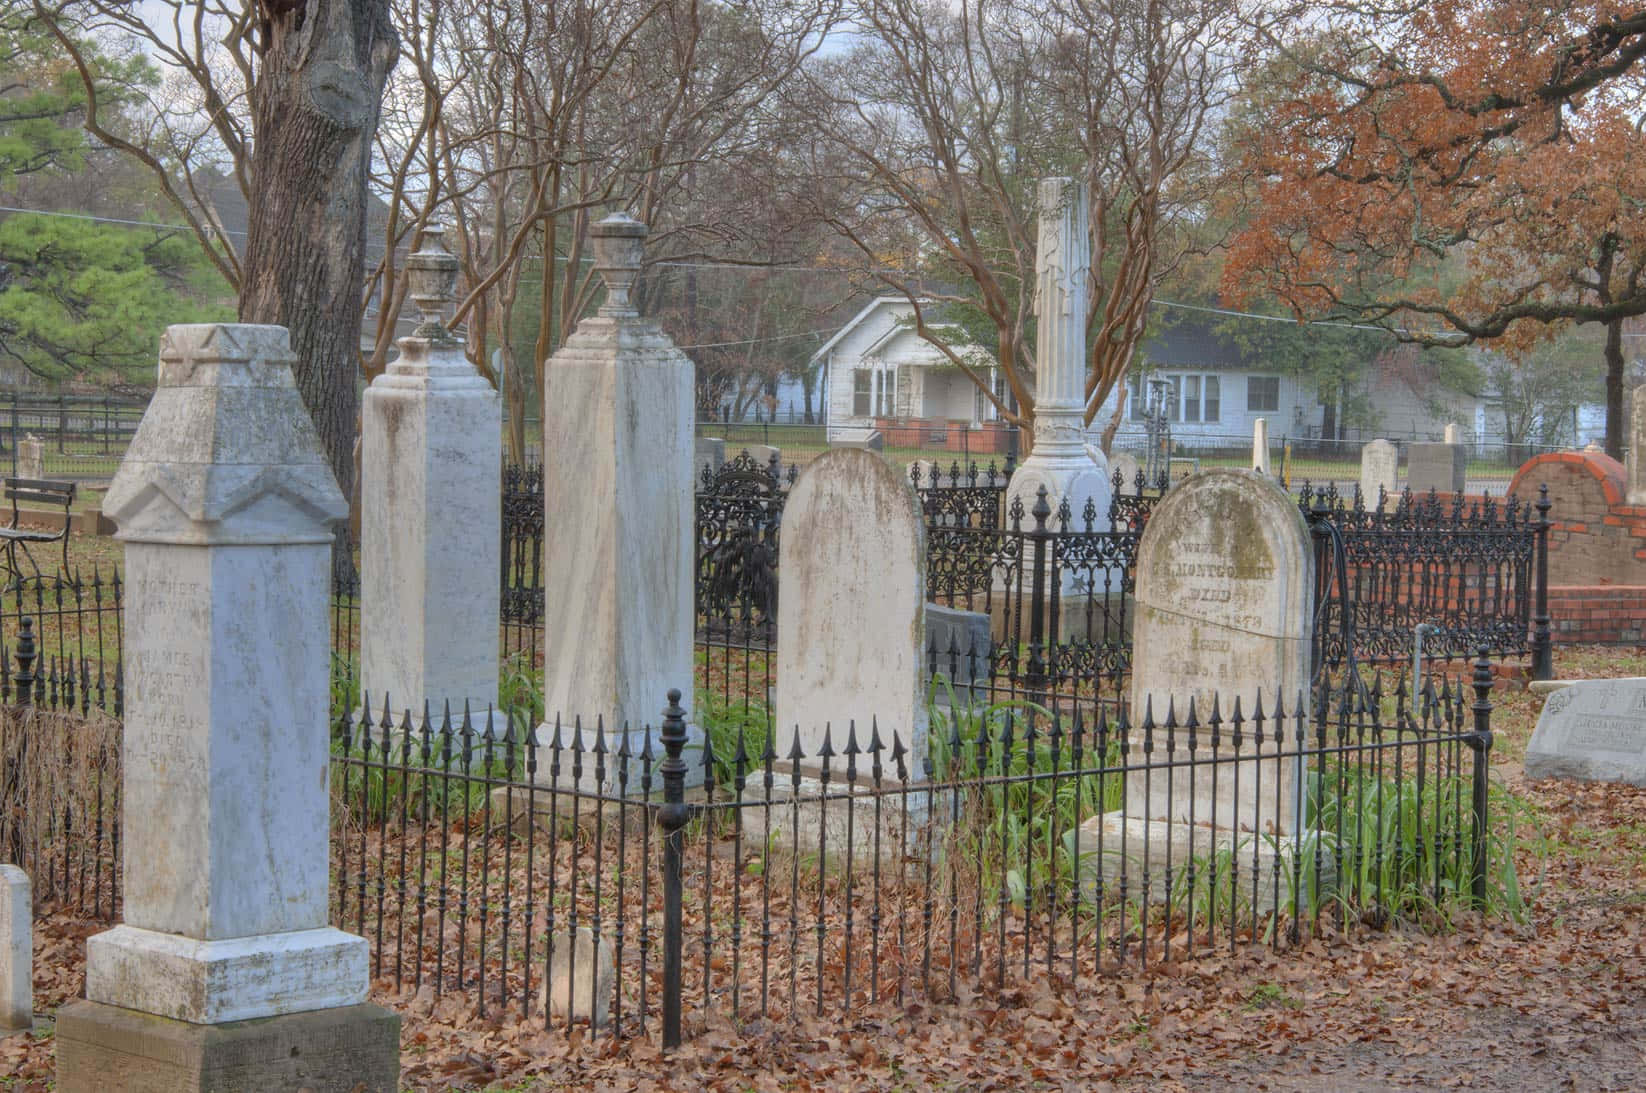 A Cemetery With Many Tombstones And A Fence